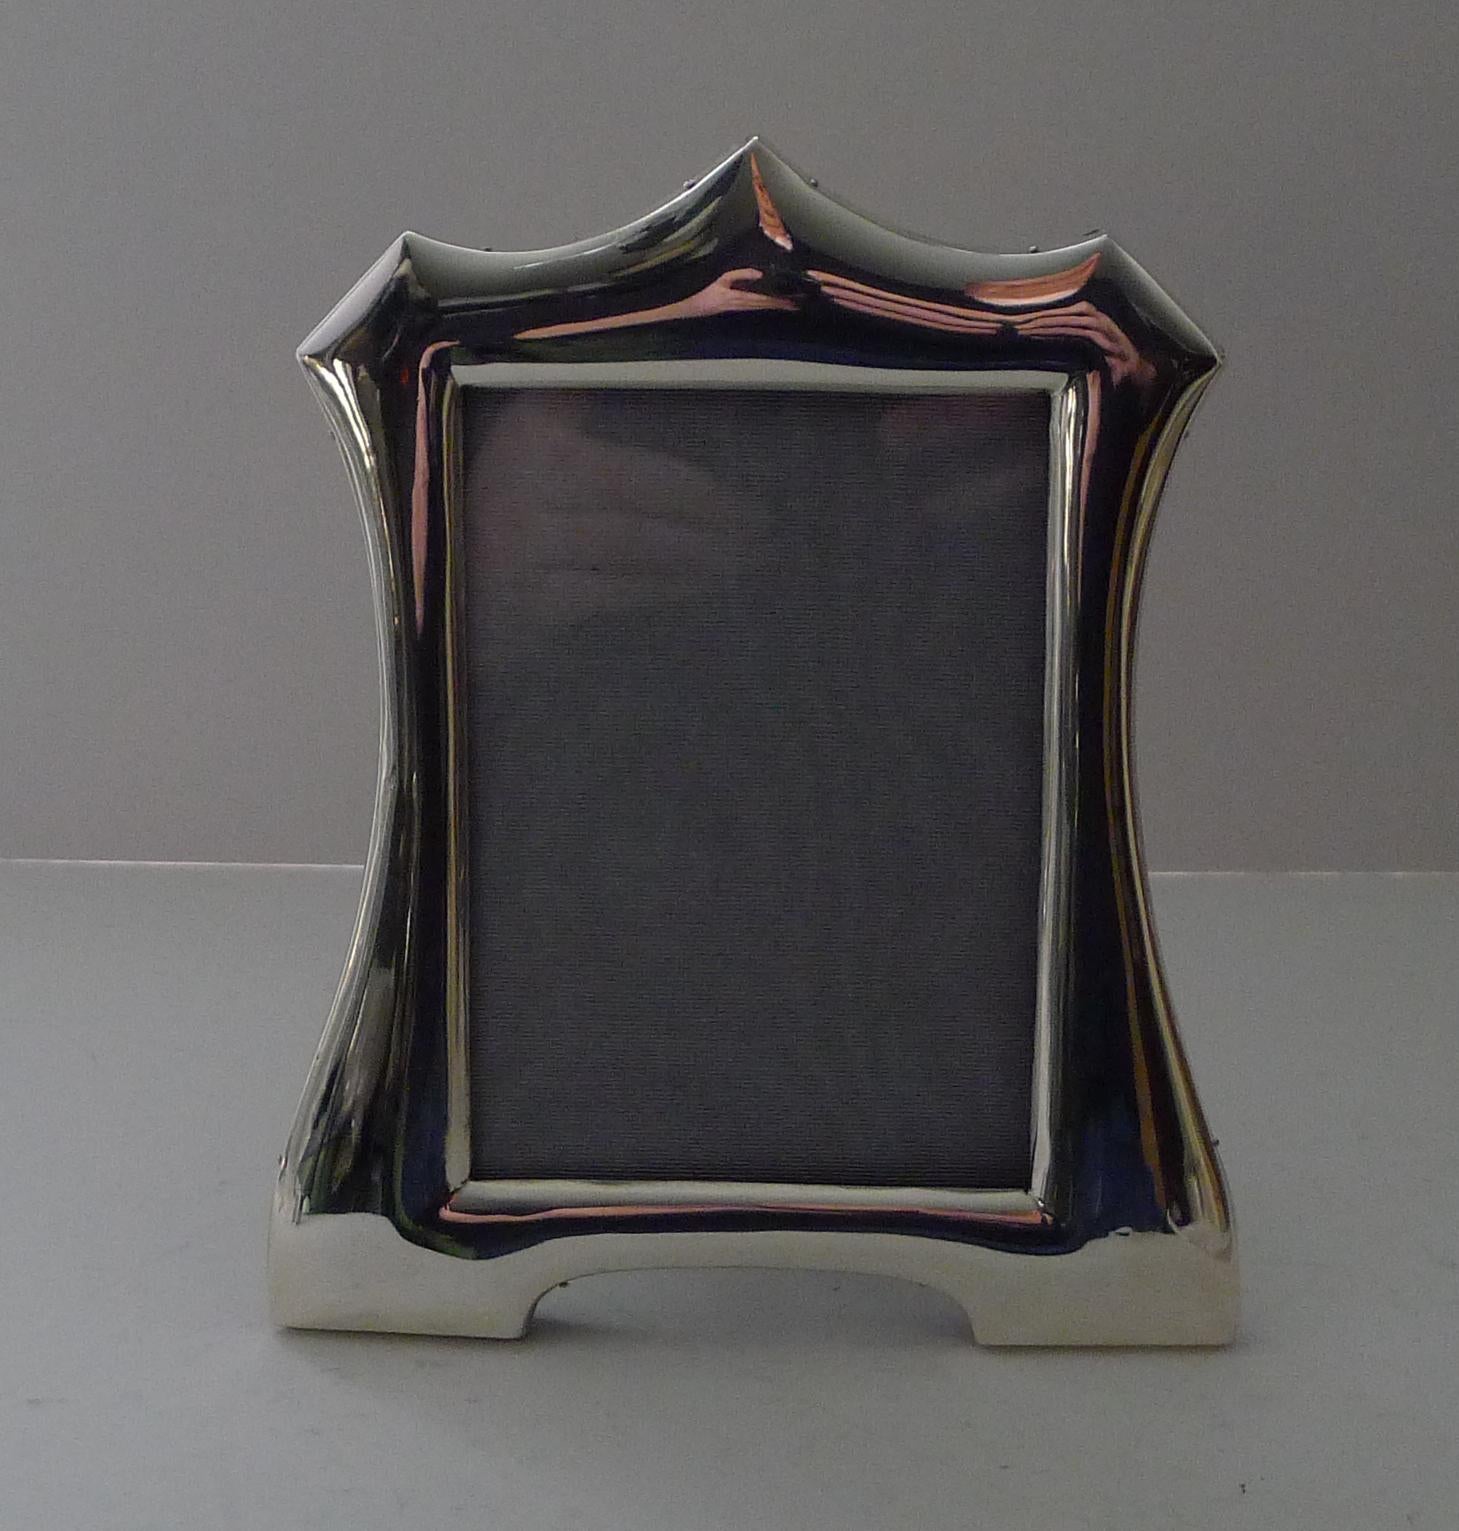 British Smart Antique English Silver Photograph Frame by Walker & Hall, 1913